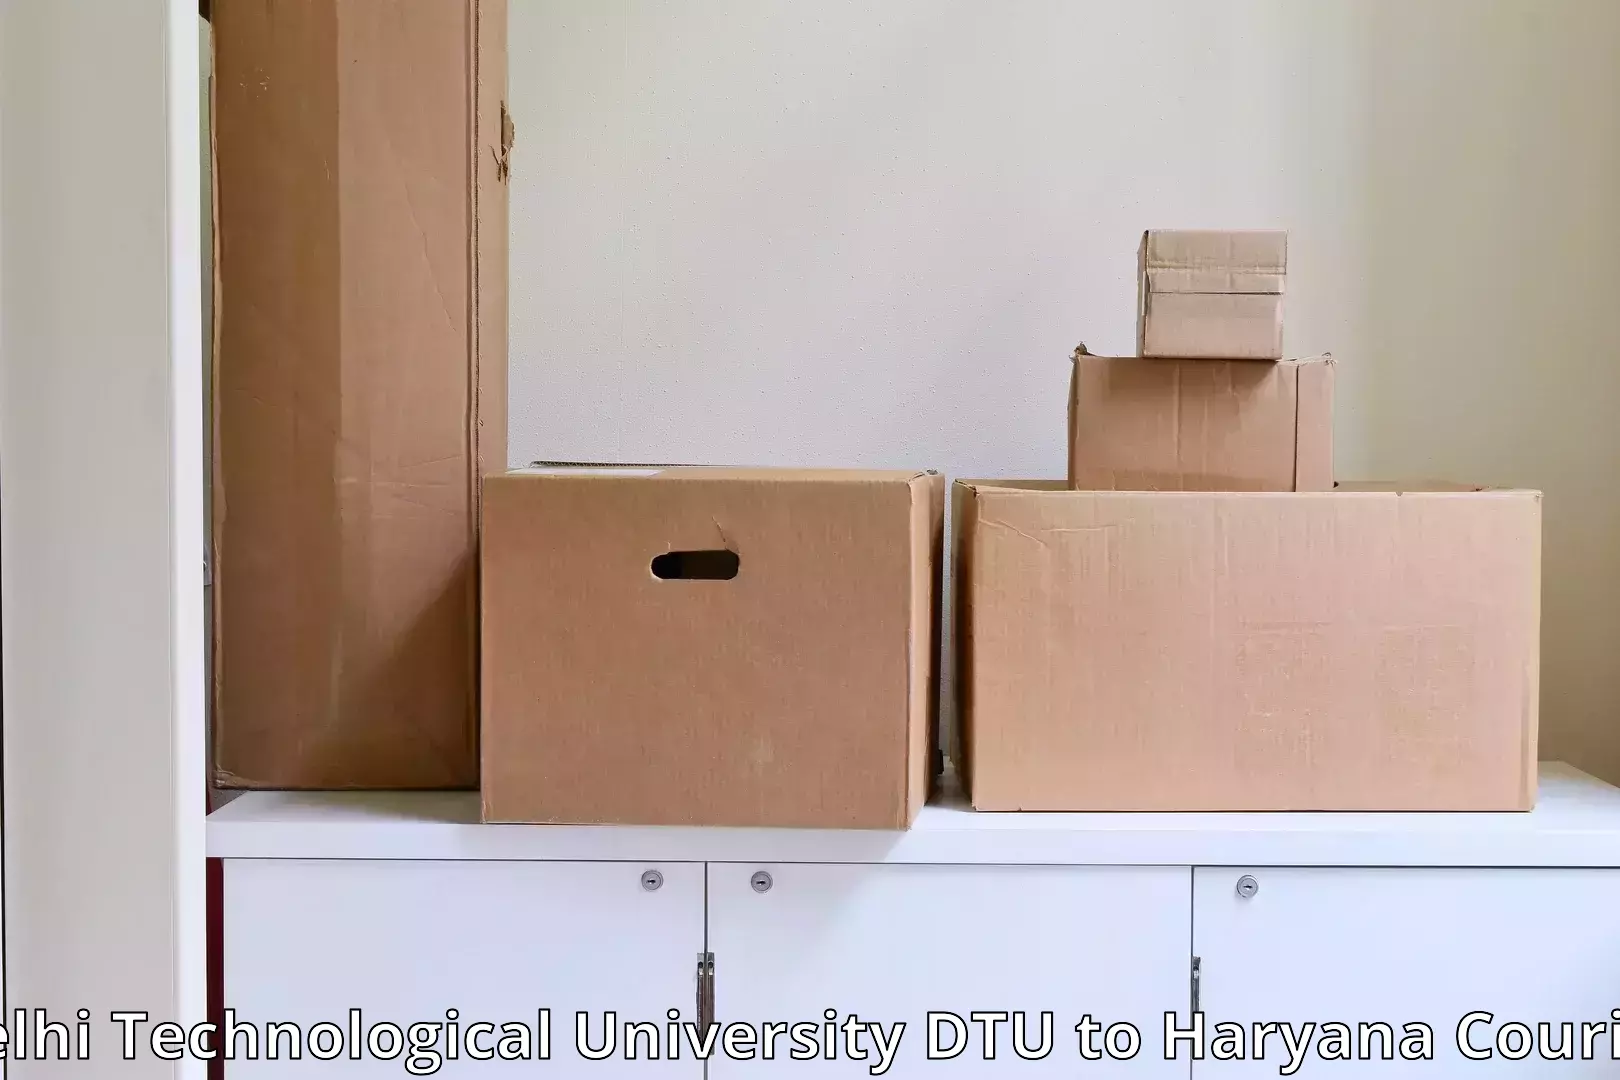 High-quality moving services Delhi Technological University DTU to Haryana